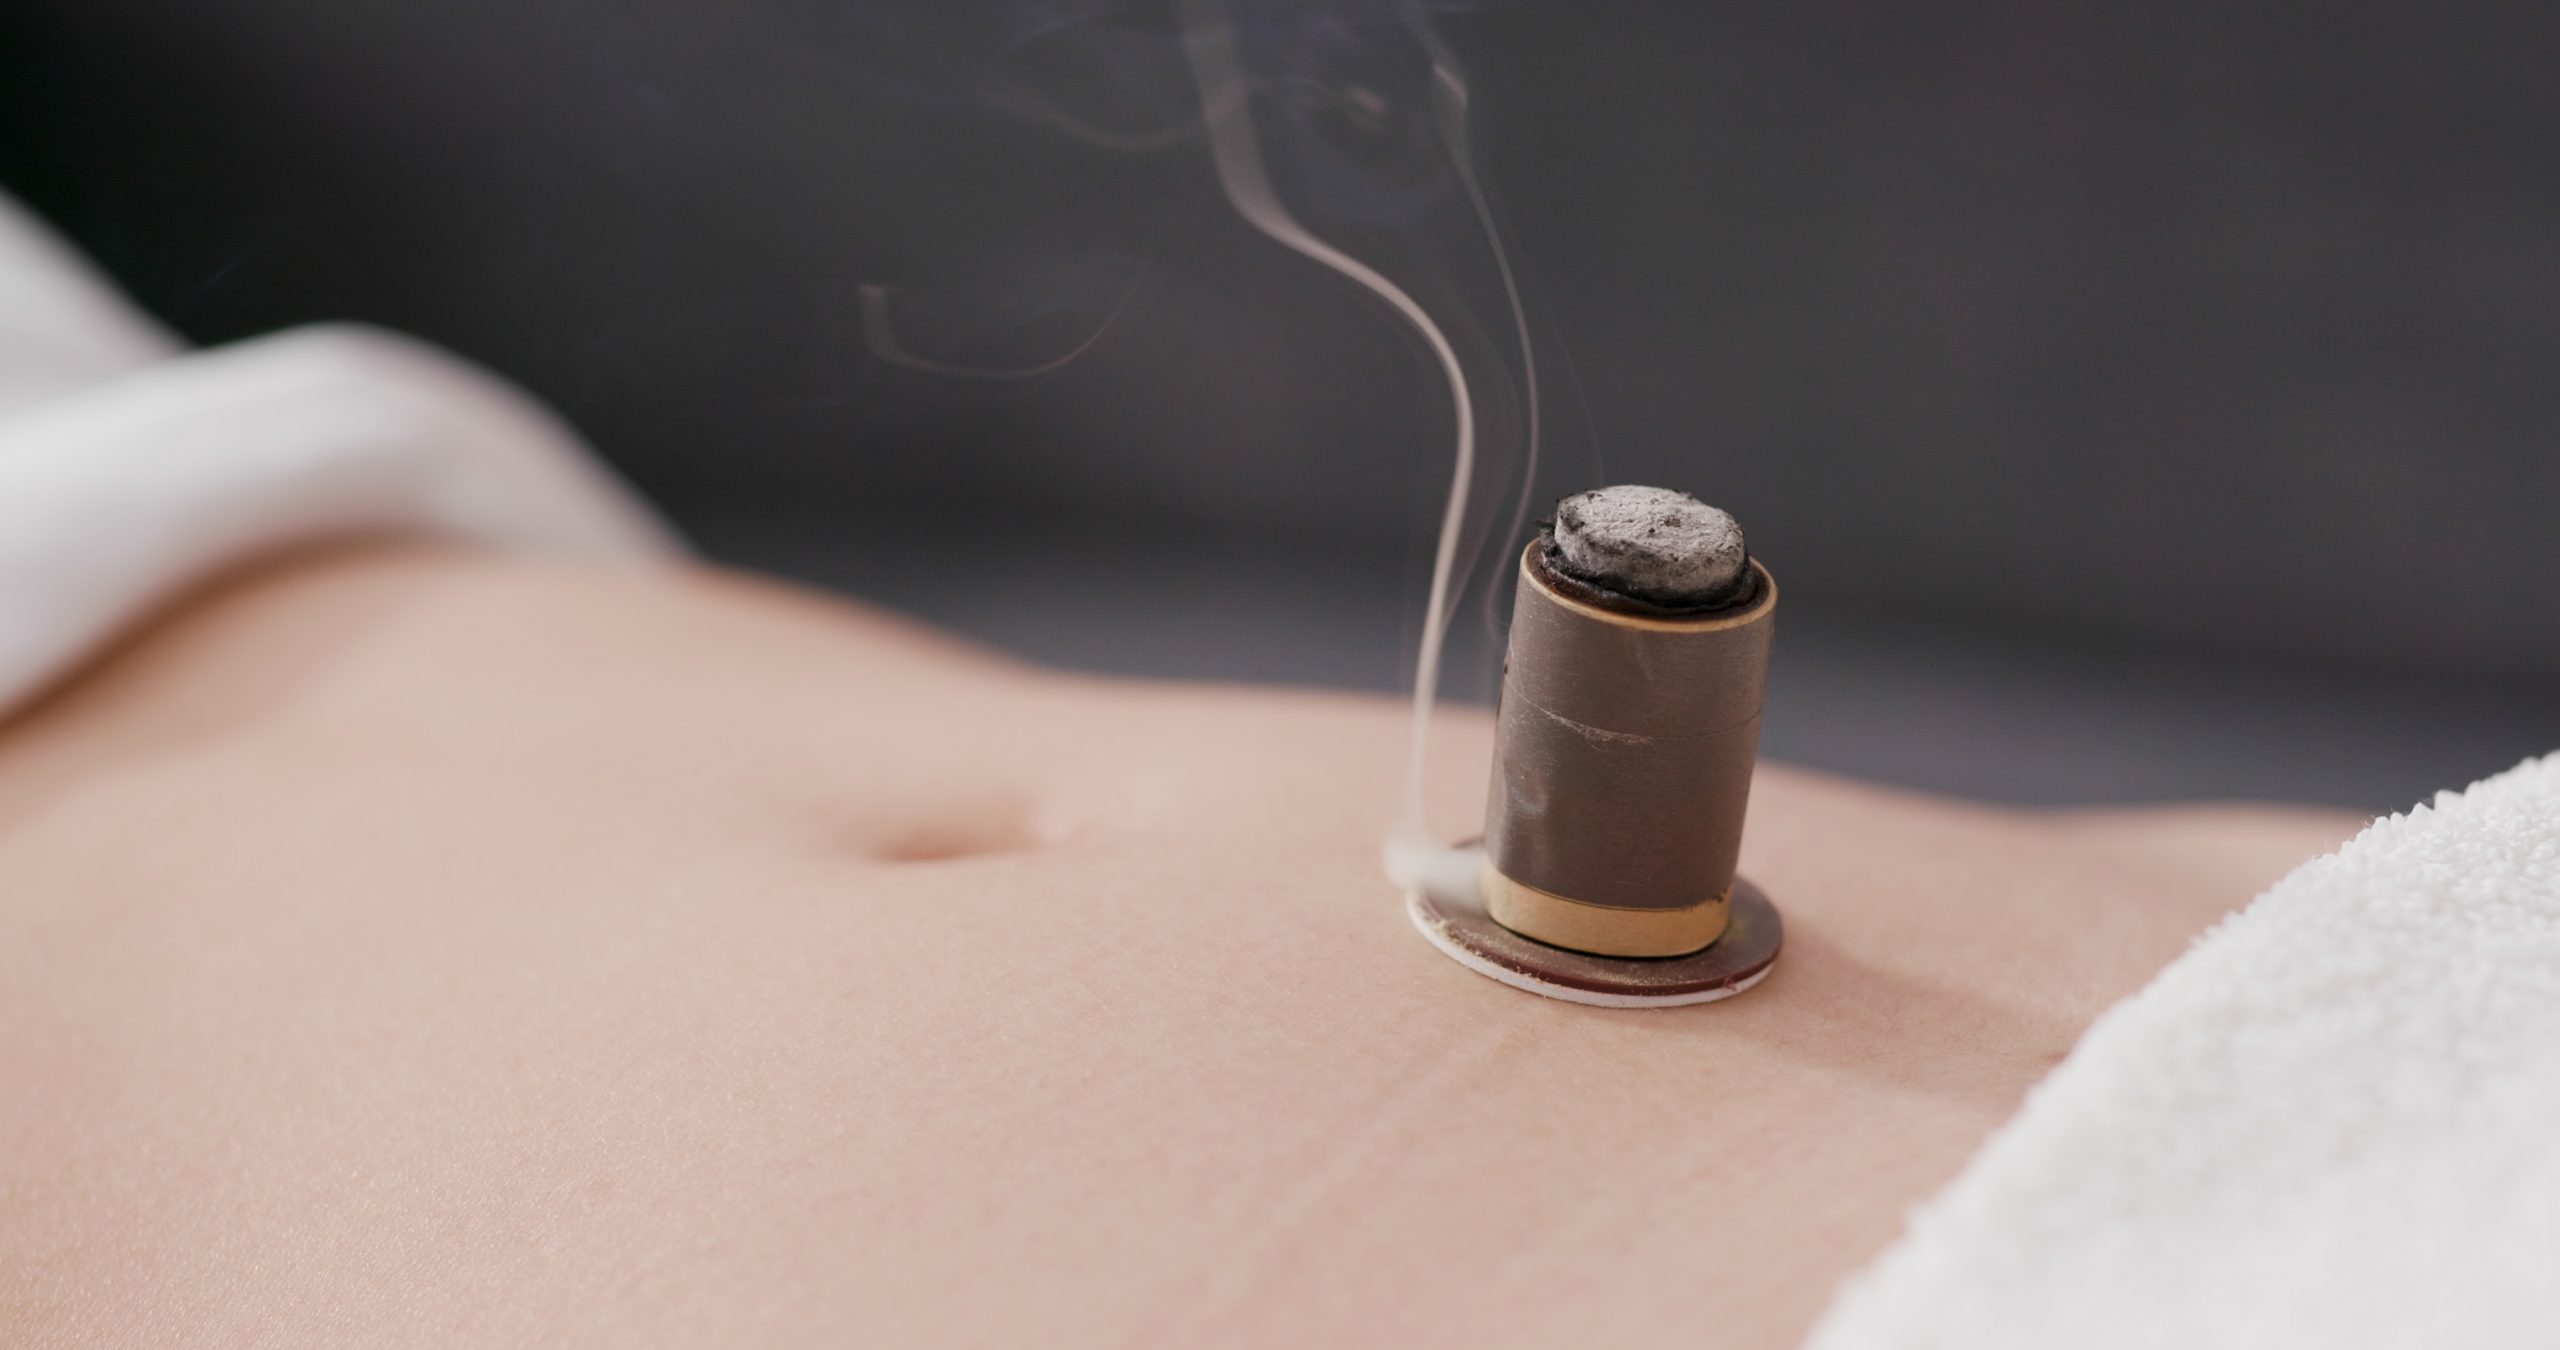 Warmth Throughout the Winter with Moxibustion